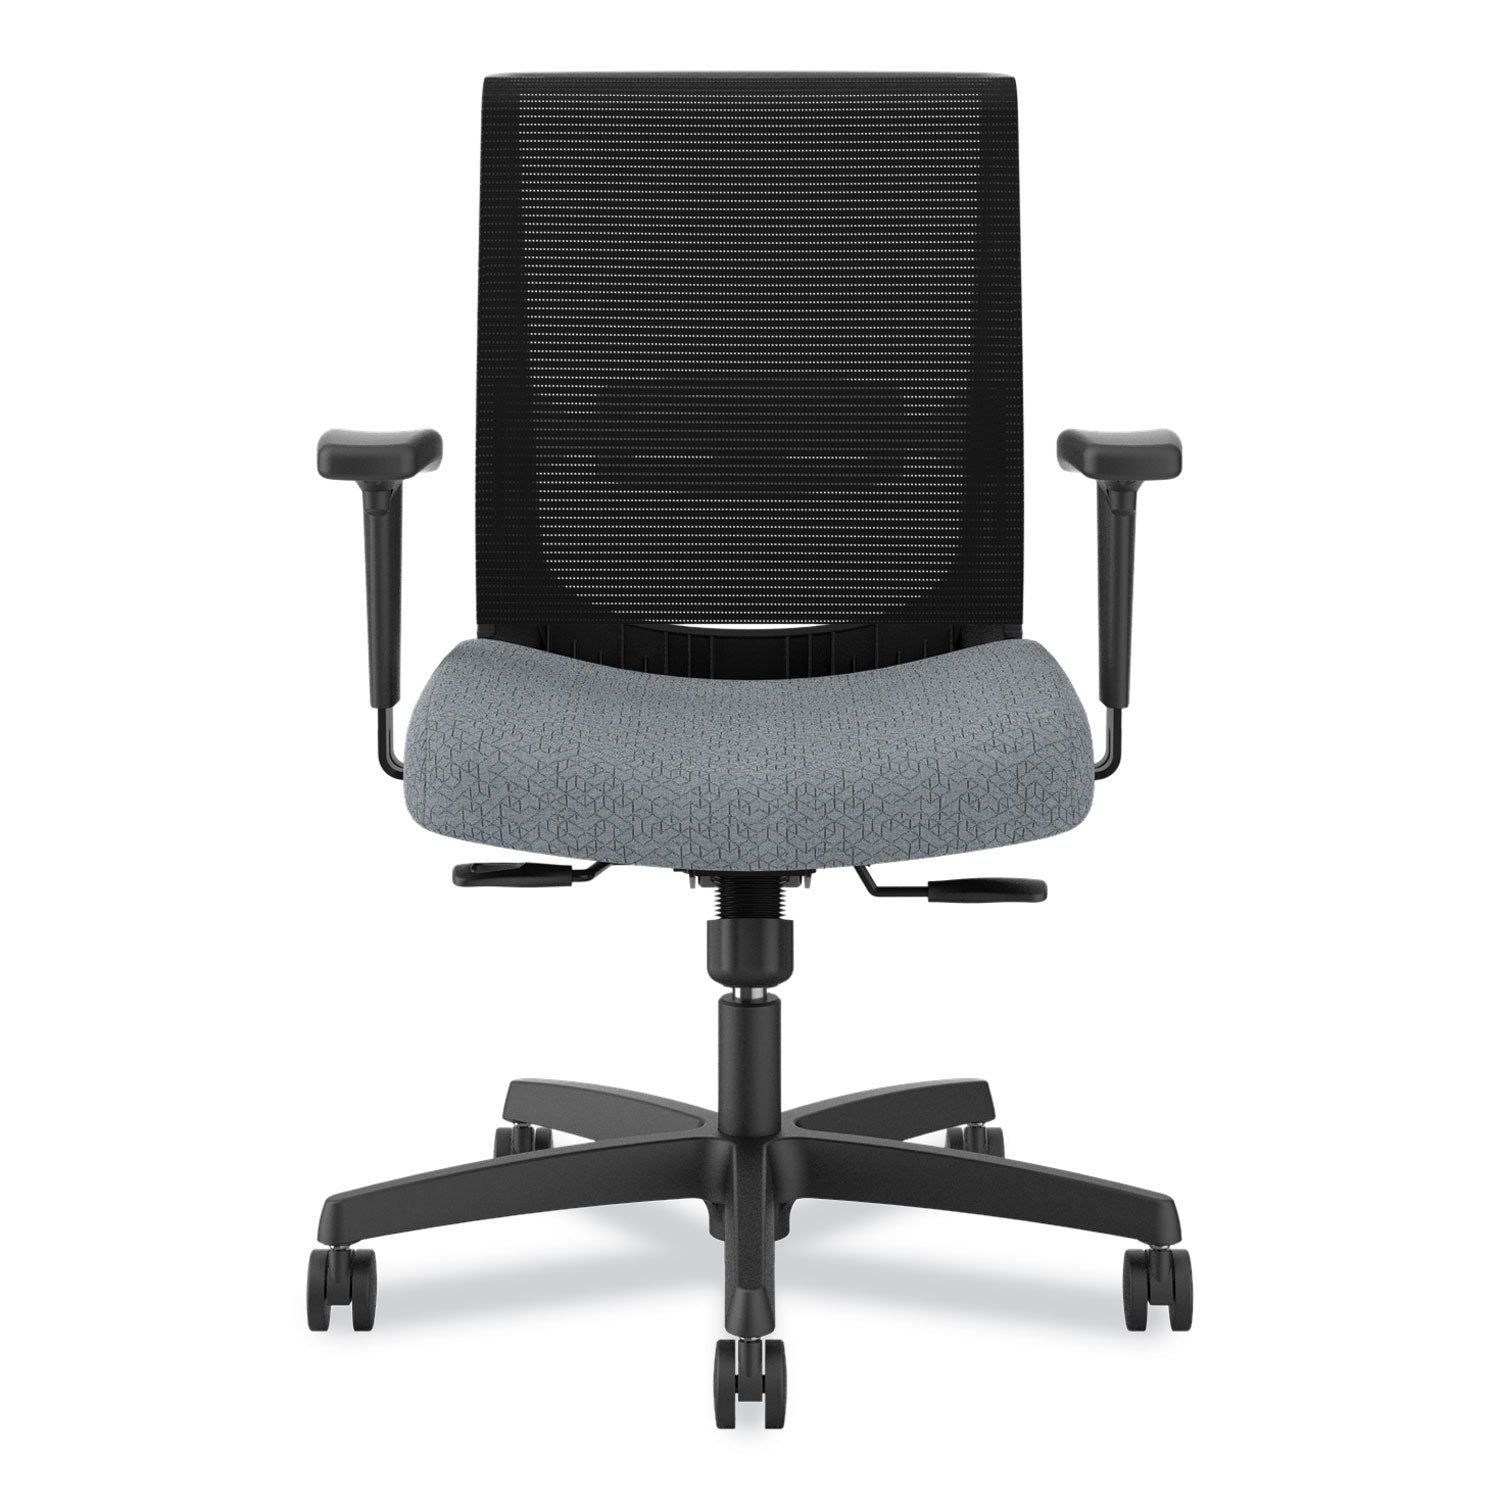 convergence-mid-back-task-chair-up-to-275-lb-165-to-21-seat-ht-basalt-seat-black-back-frame-ships-in-7-10-bus-days_honcmy1aapx25 - 2